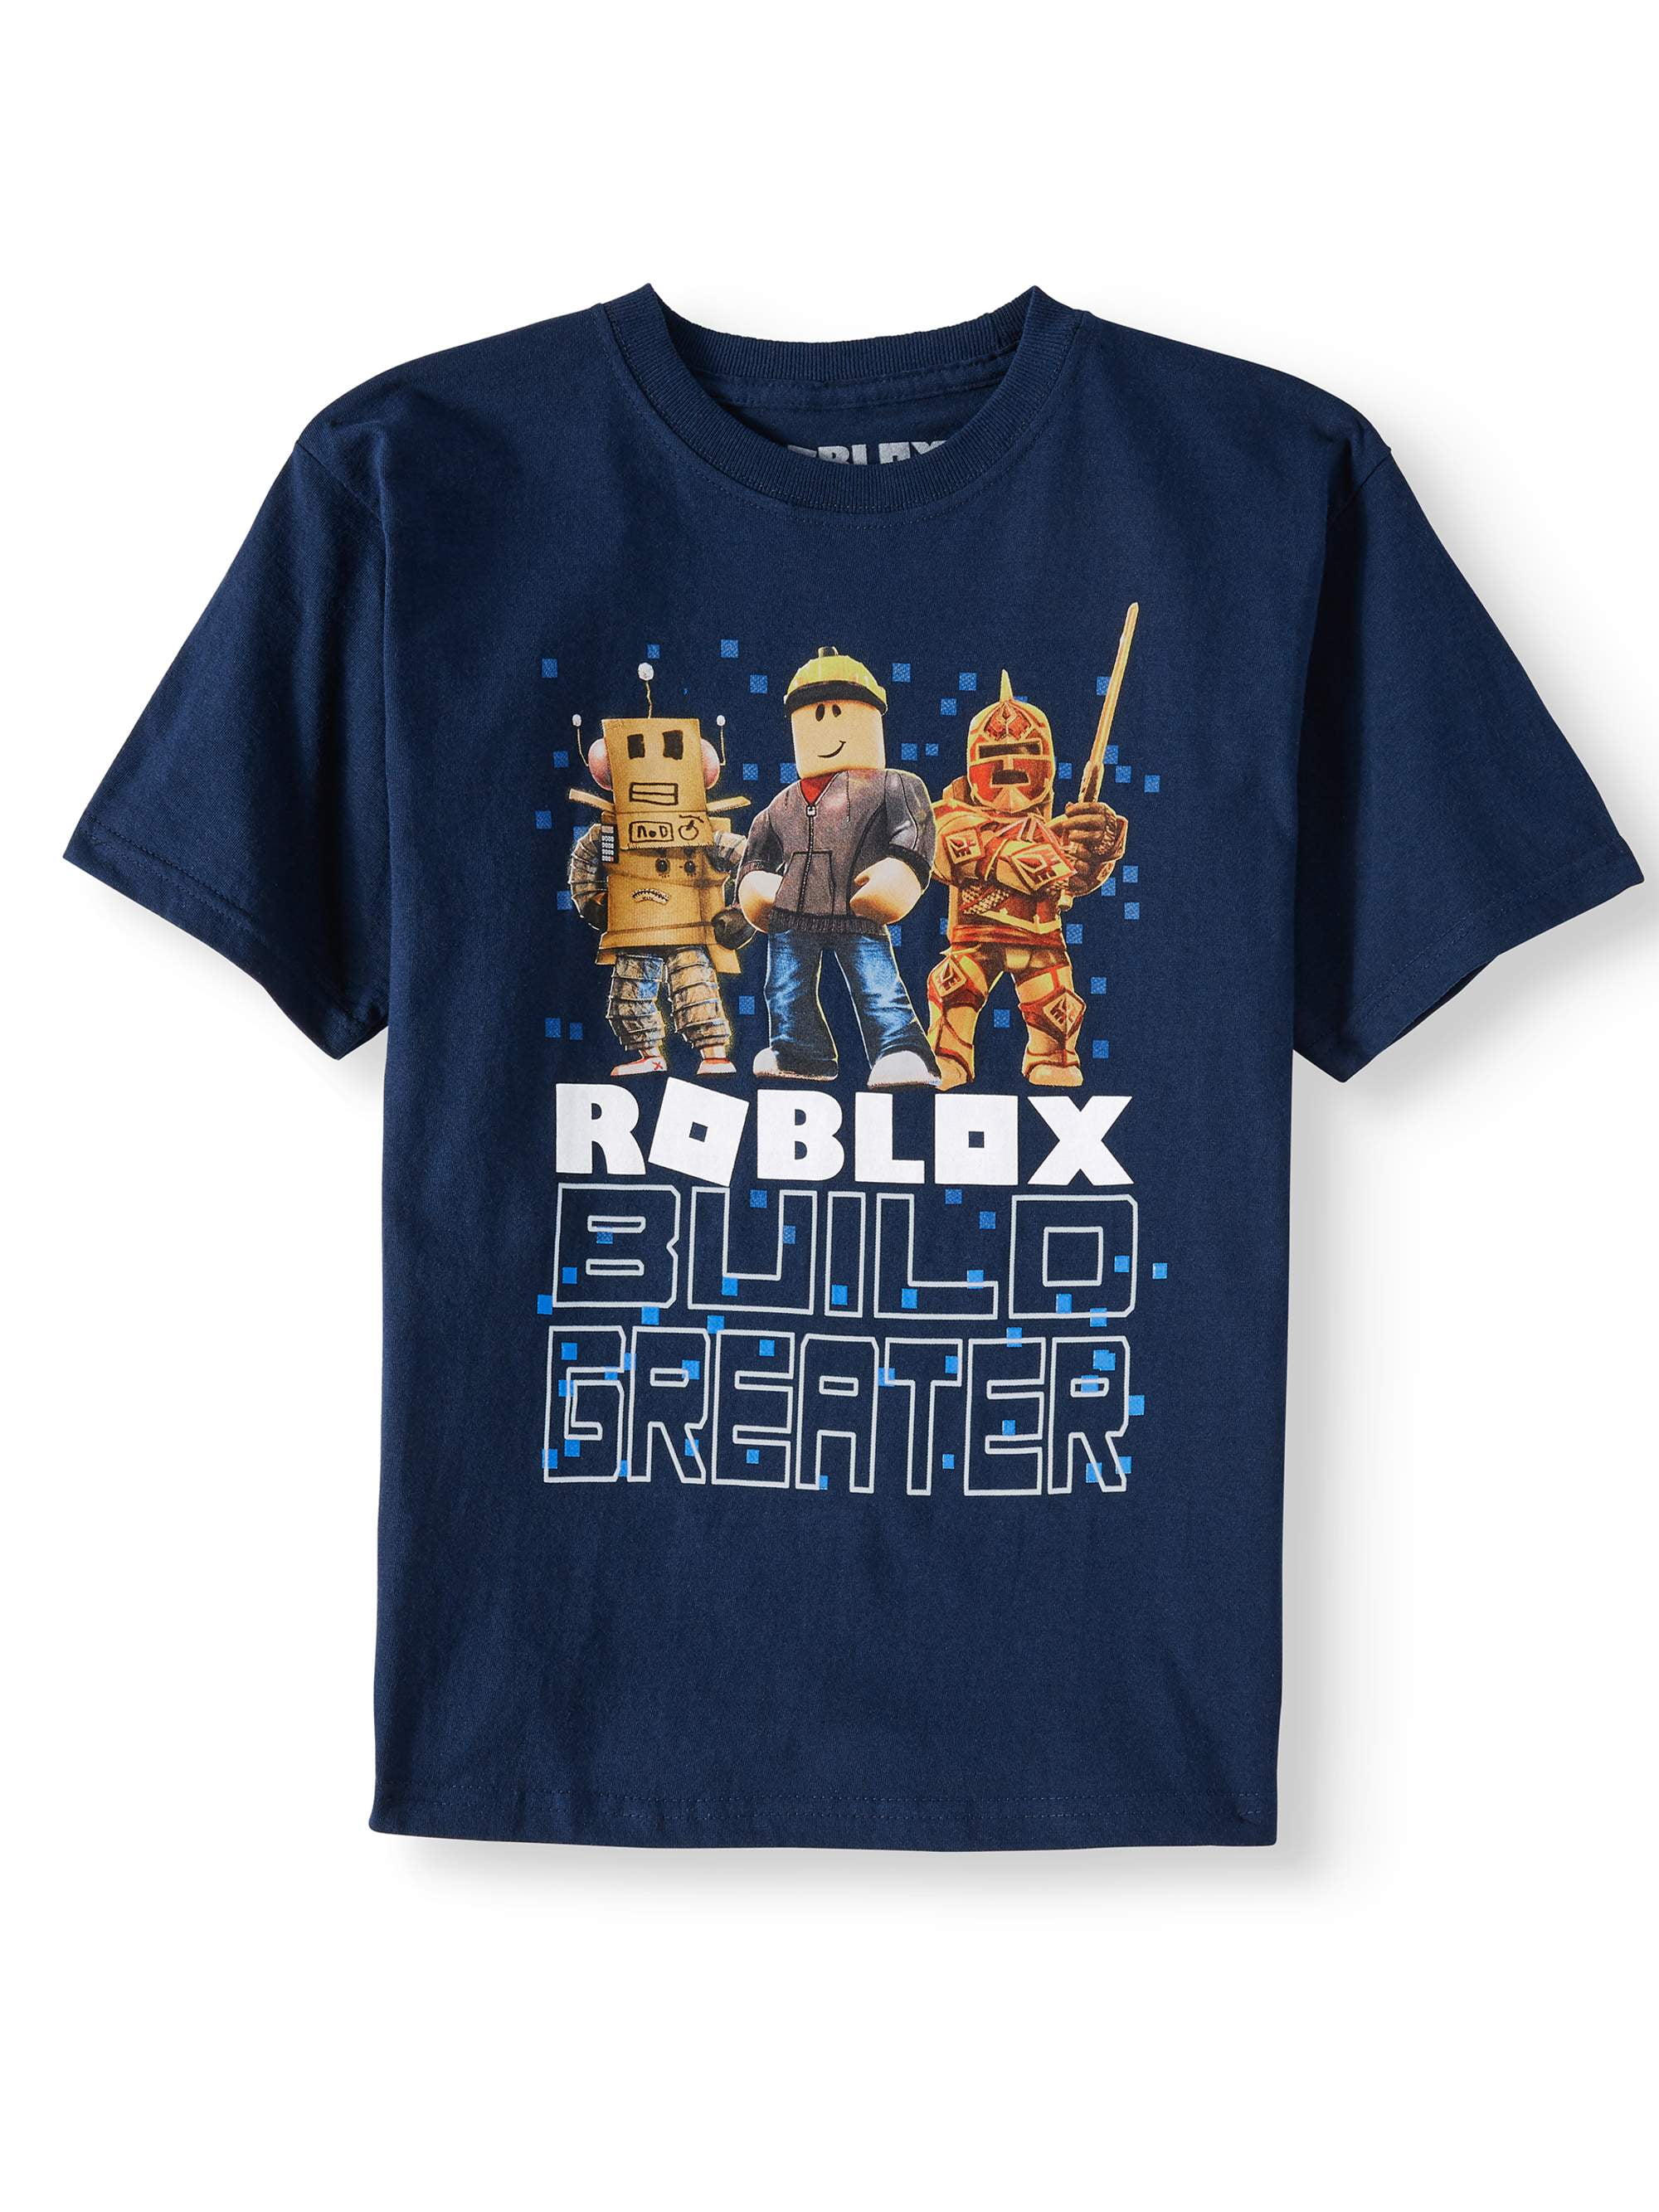 Roblox Men's Logo Short Sleeve Graphic T-Shirt, up to Size 2XL